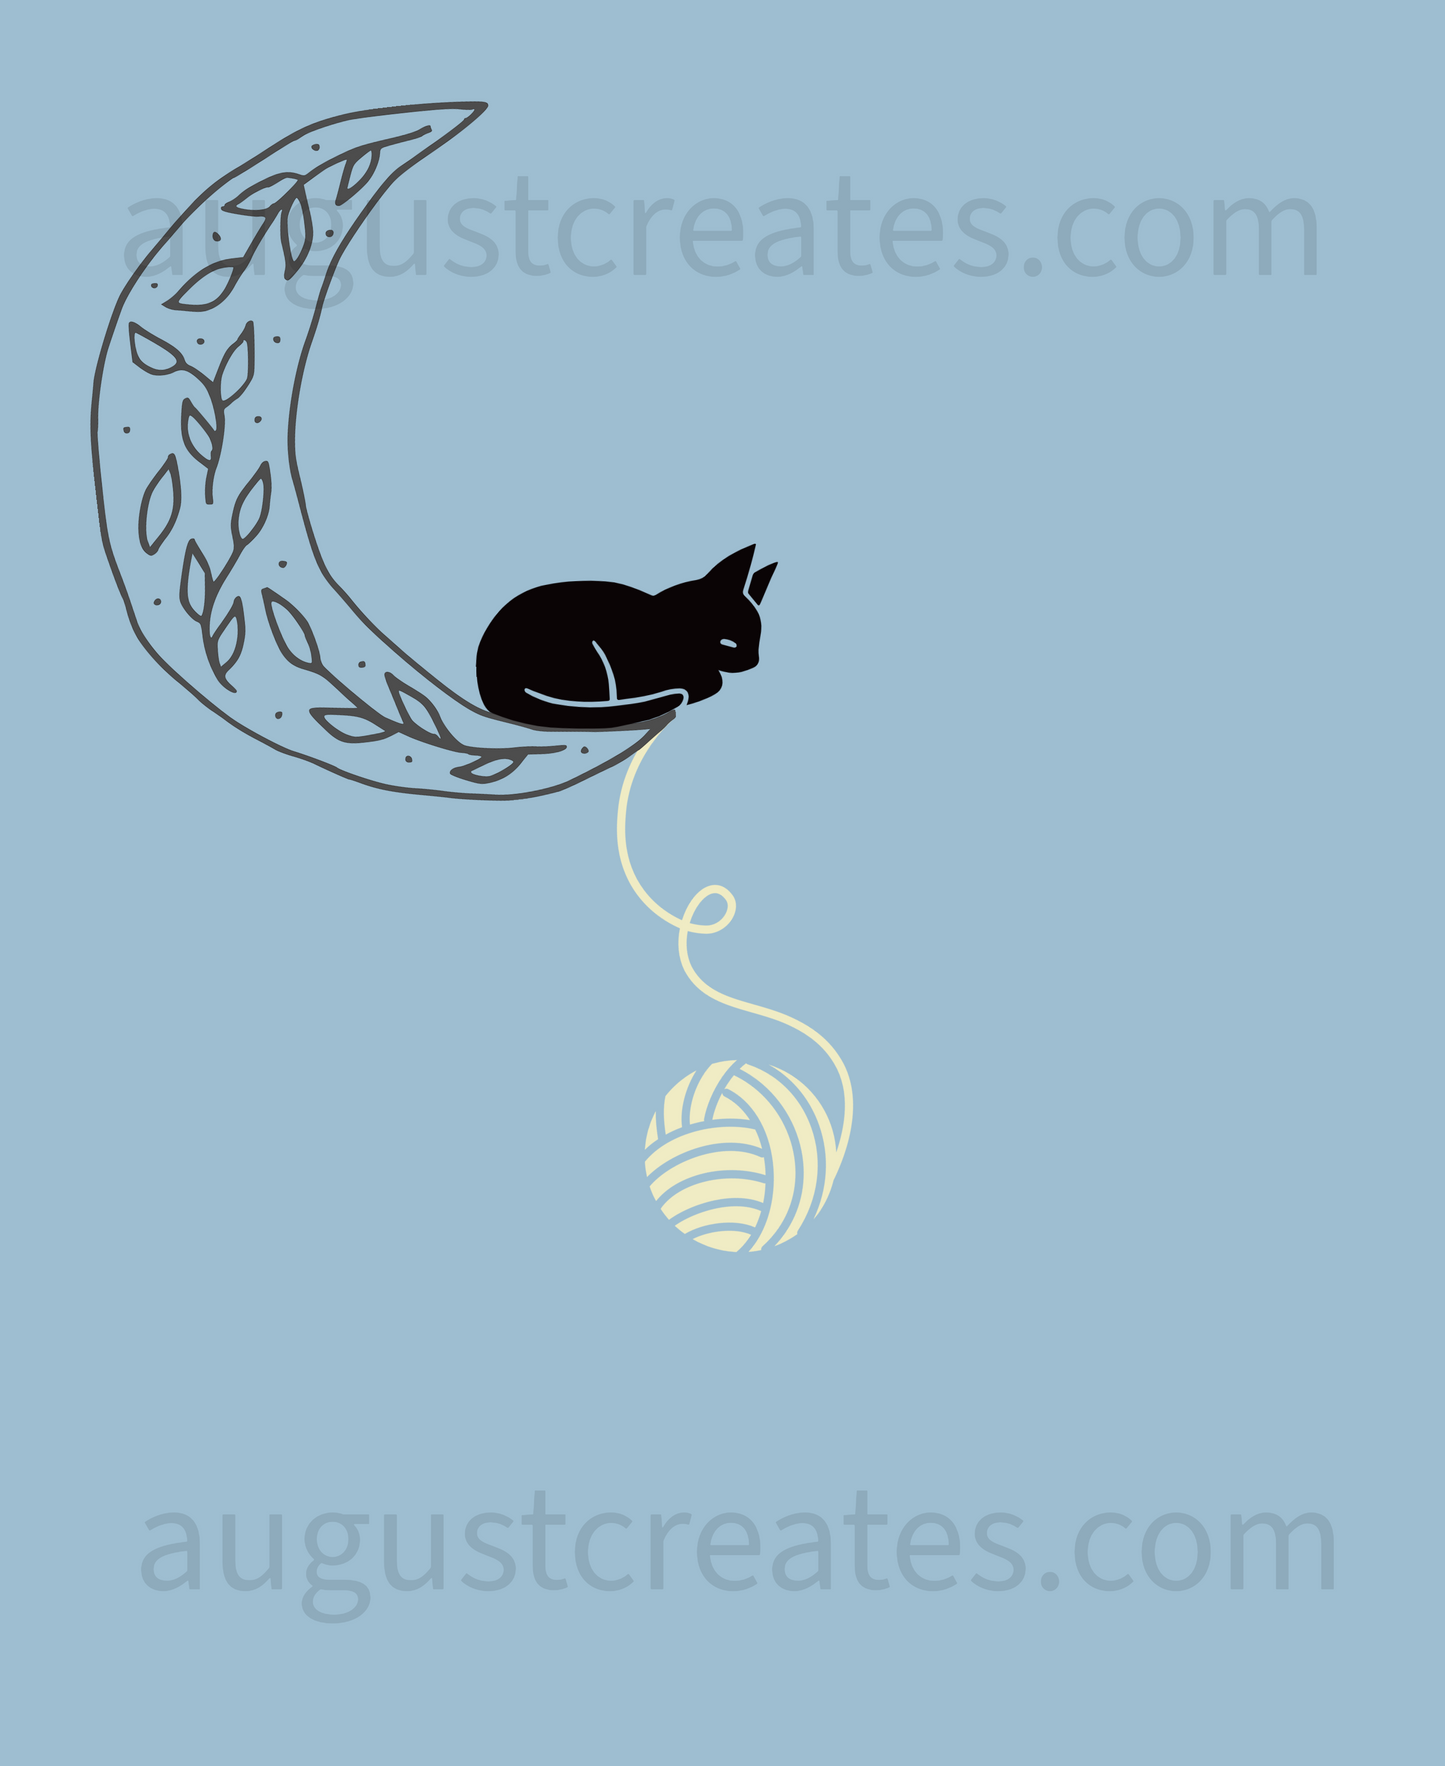 Onis the cat, pushing yarn off a crescent moon